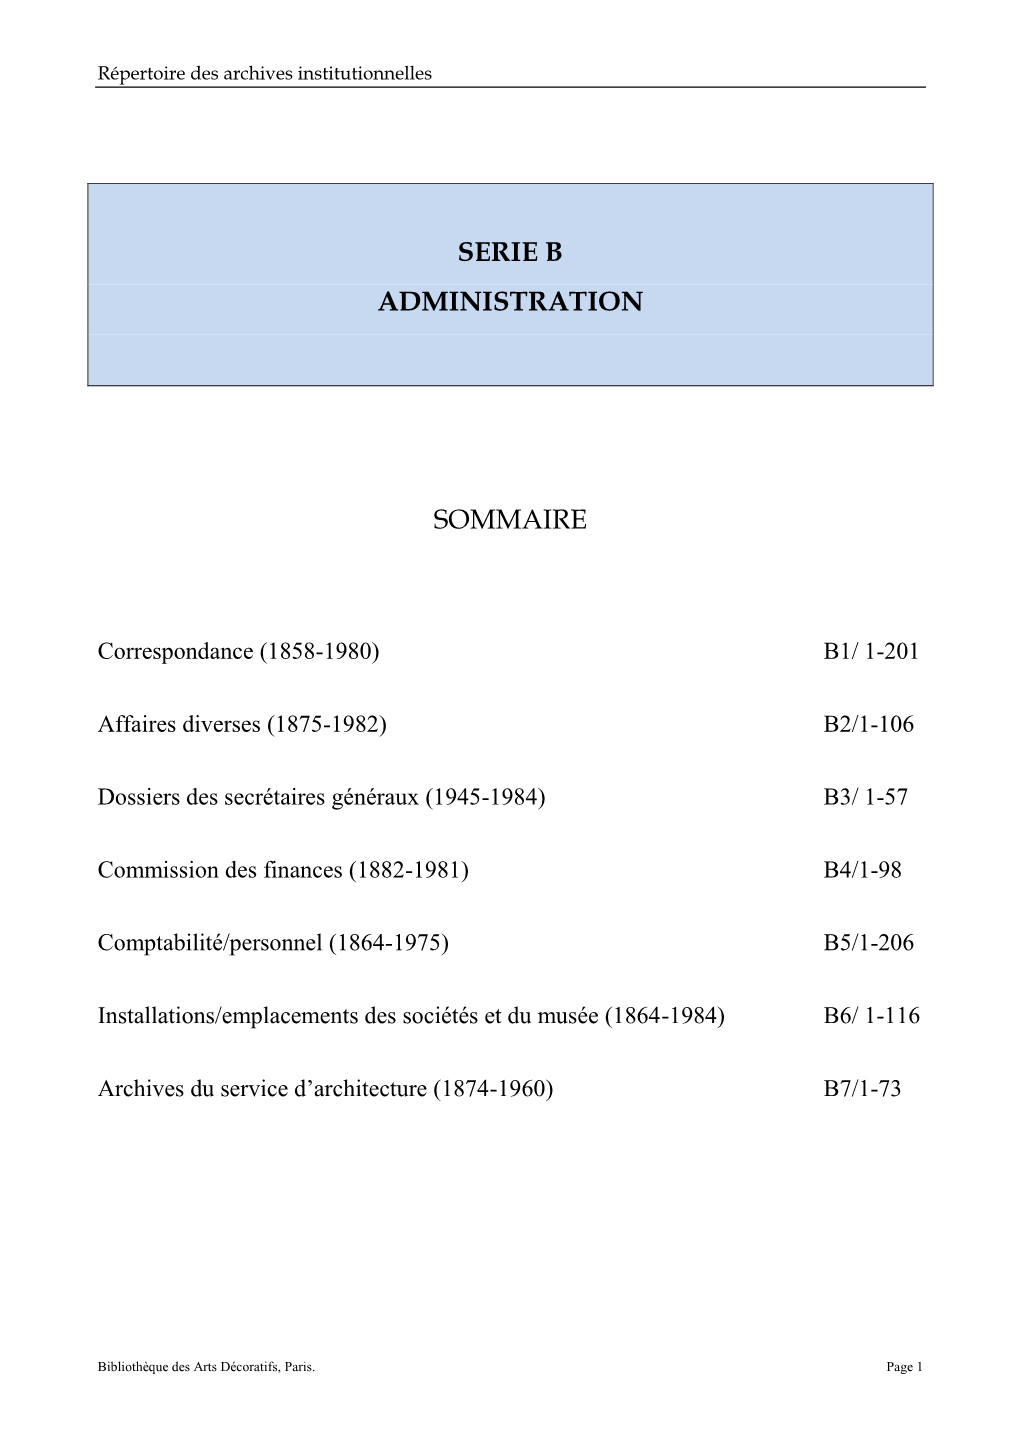 Serie B Administration Sommaire